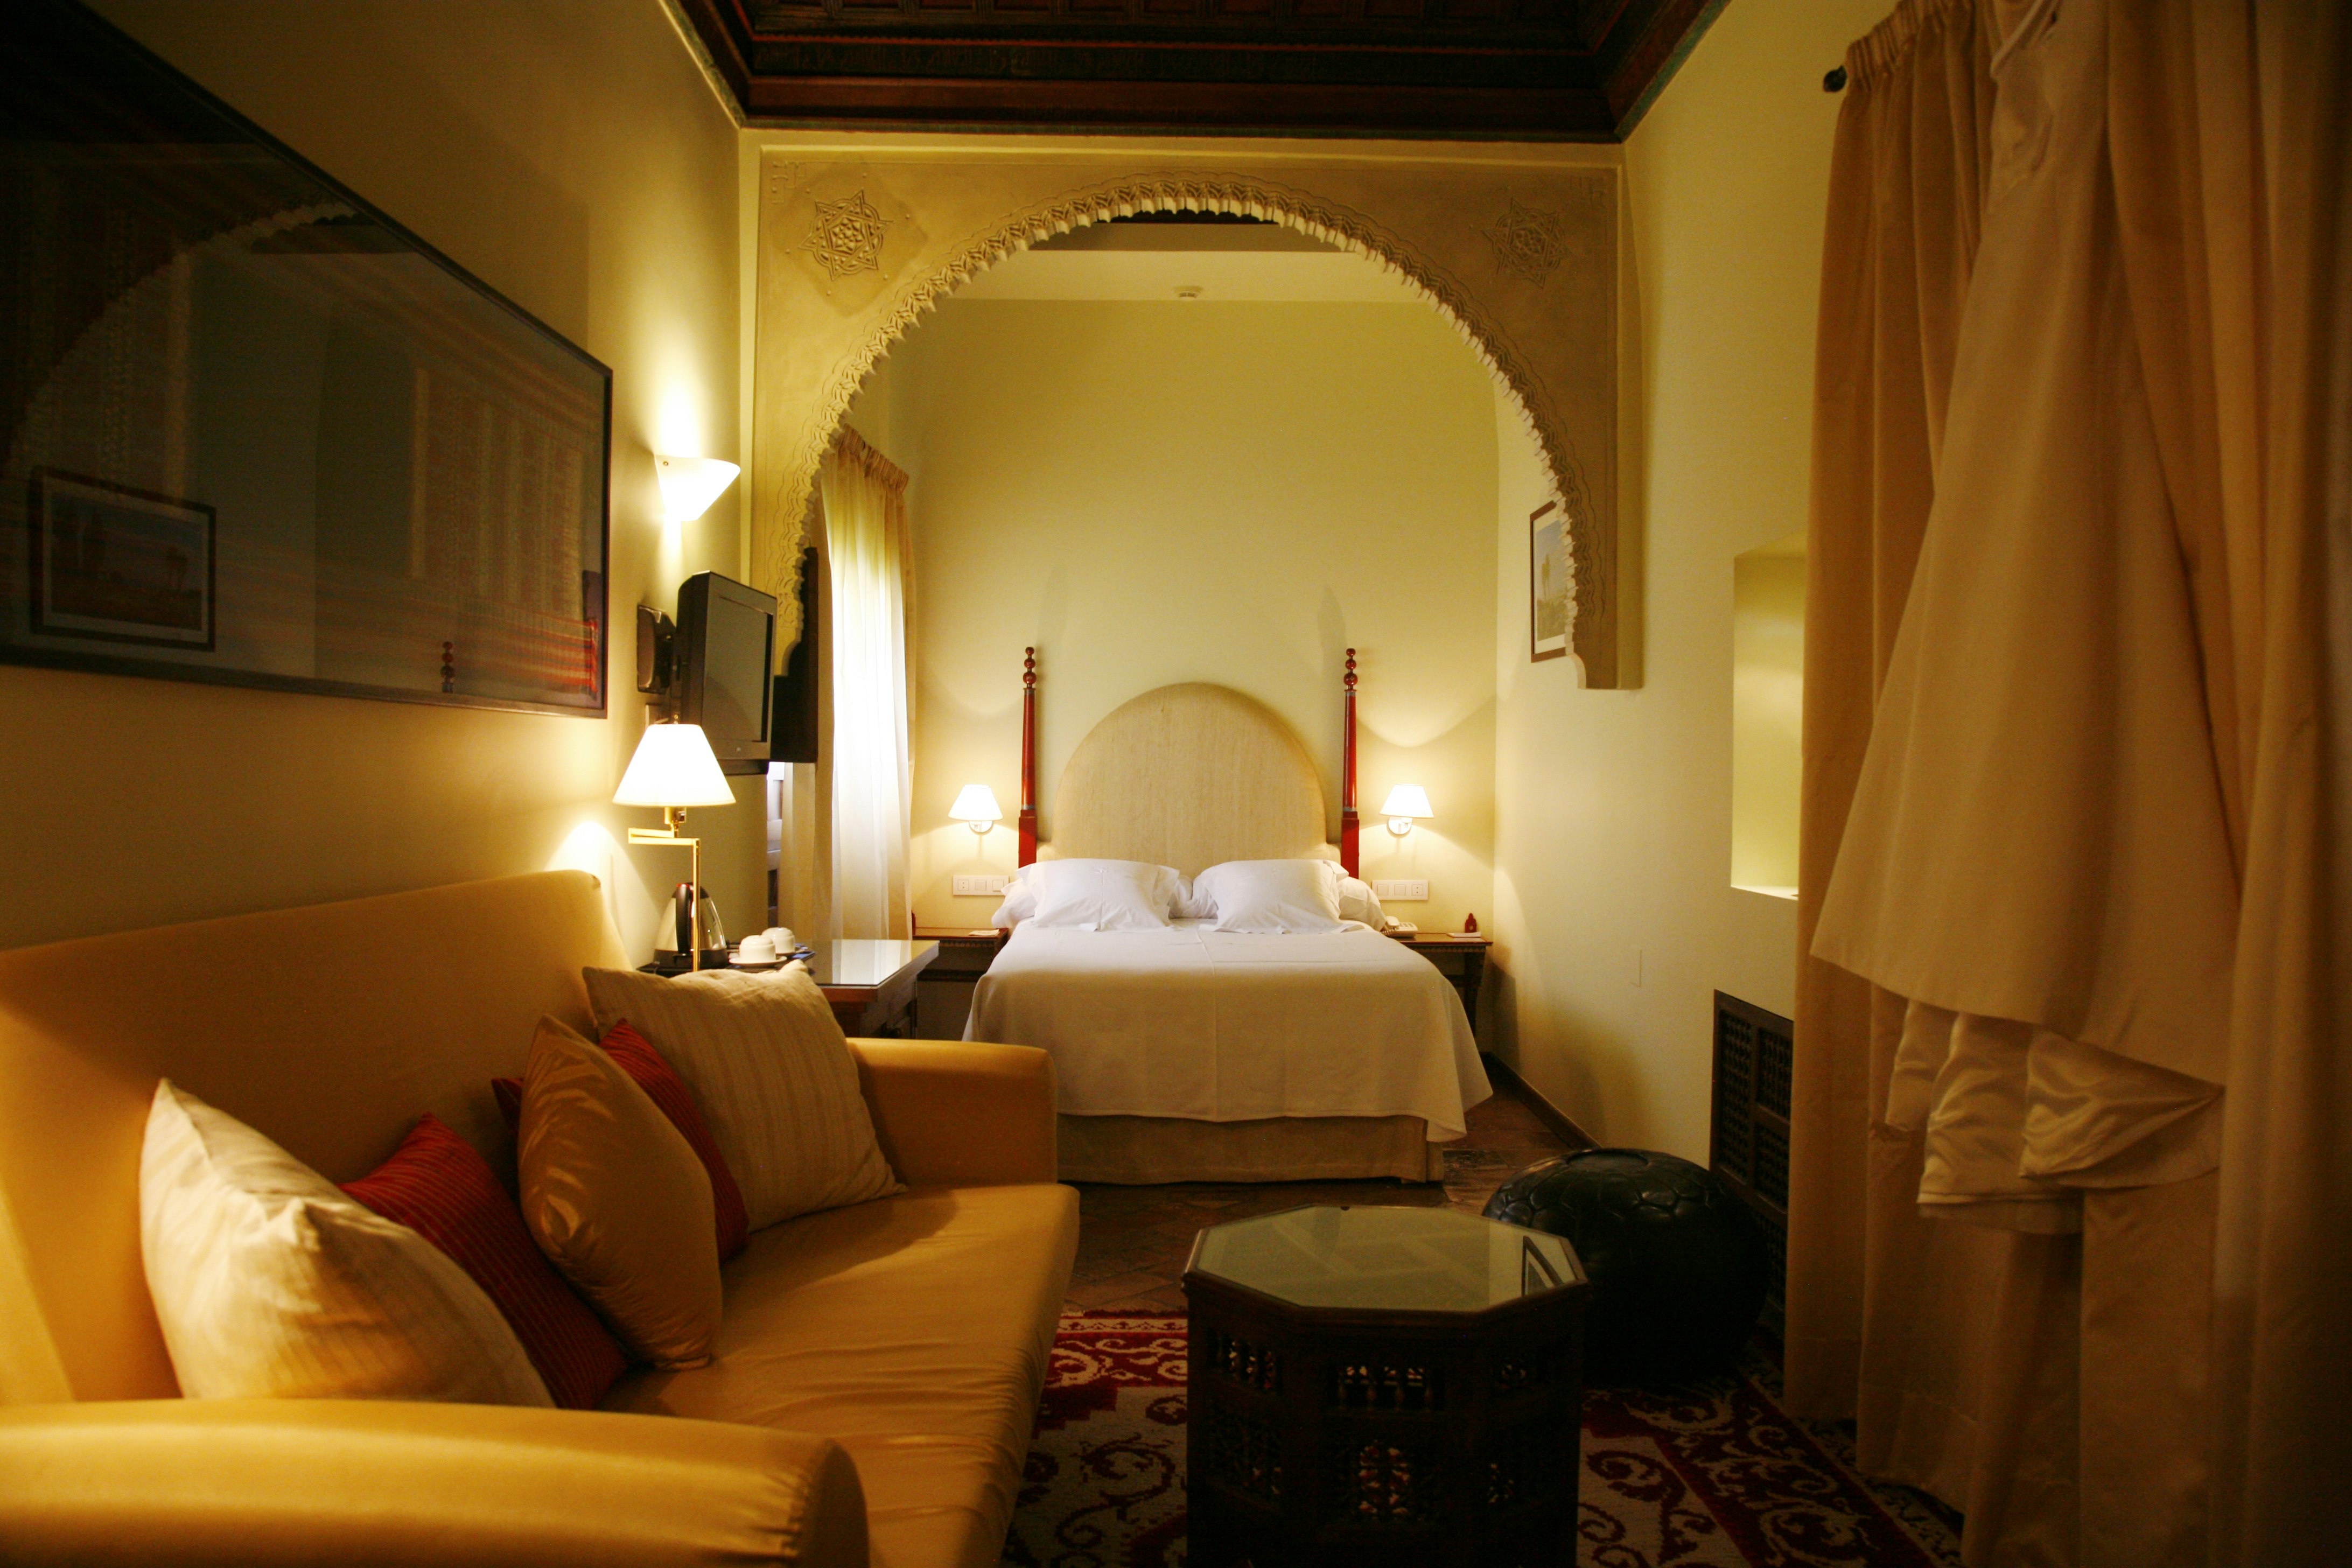 A hotel suite decorated in warm and rich colours like oranges and browns